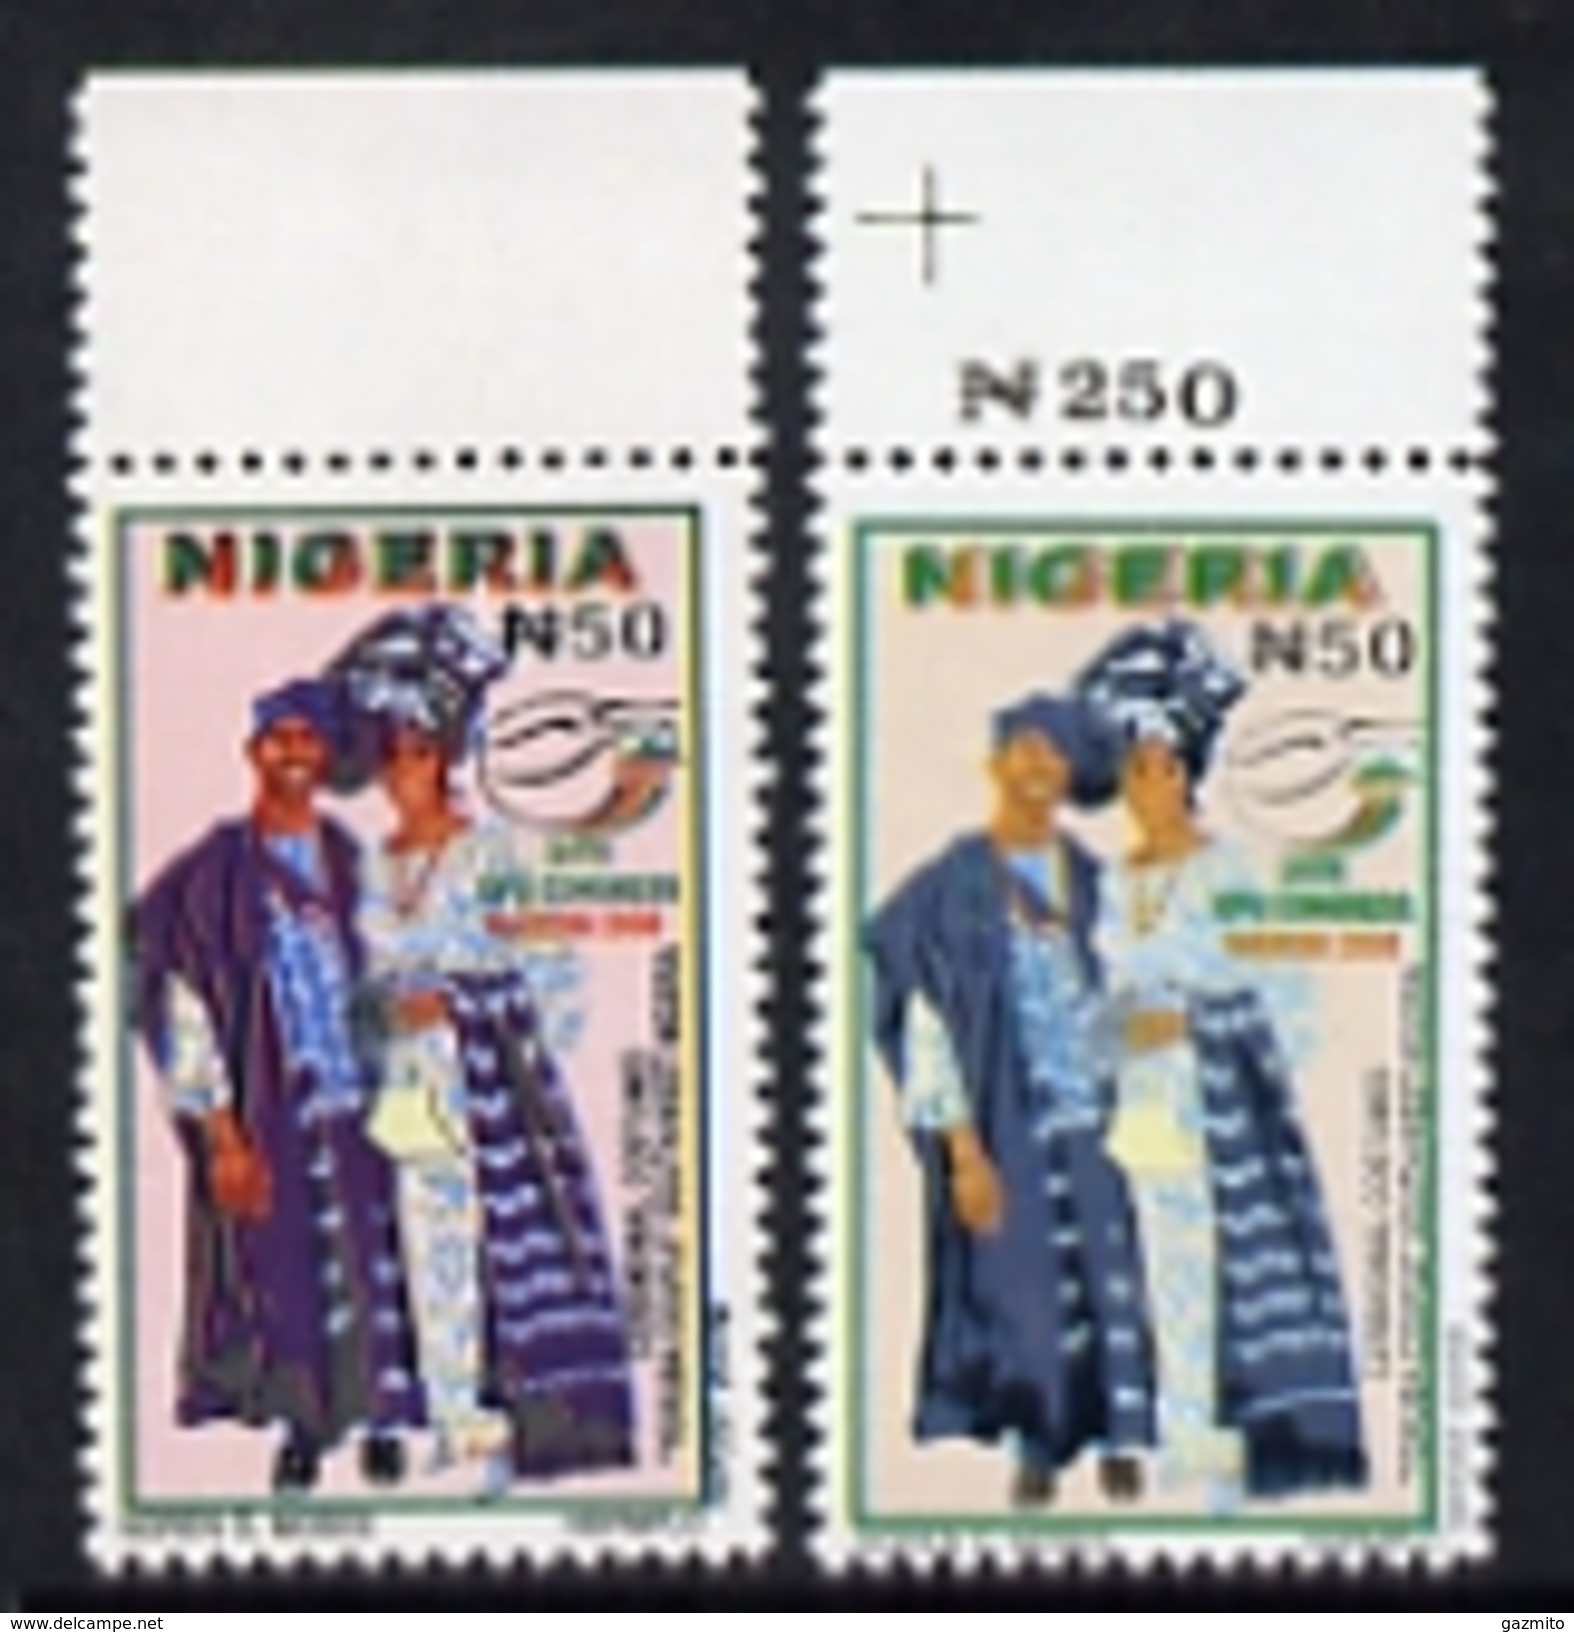 Nigeria 2008, UPU Congress N50 (Ceremonial Costumes) 2proof Marginal Single From Top Of Sheet - UPU (Union Postale Universelle)